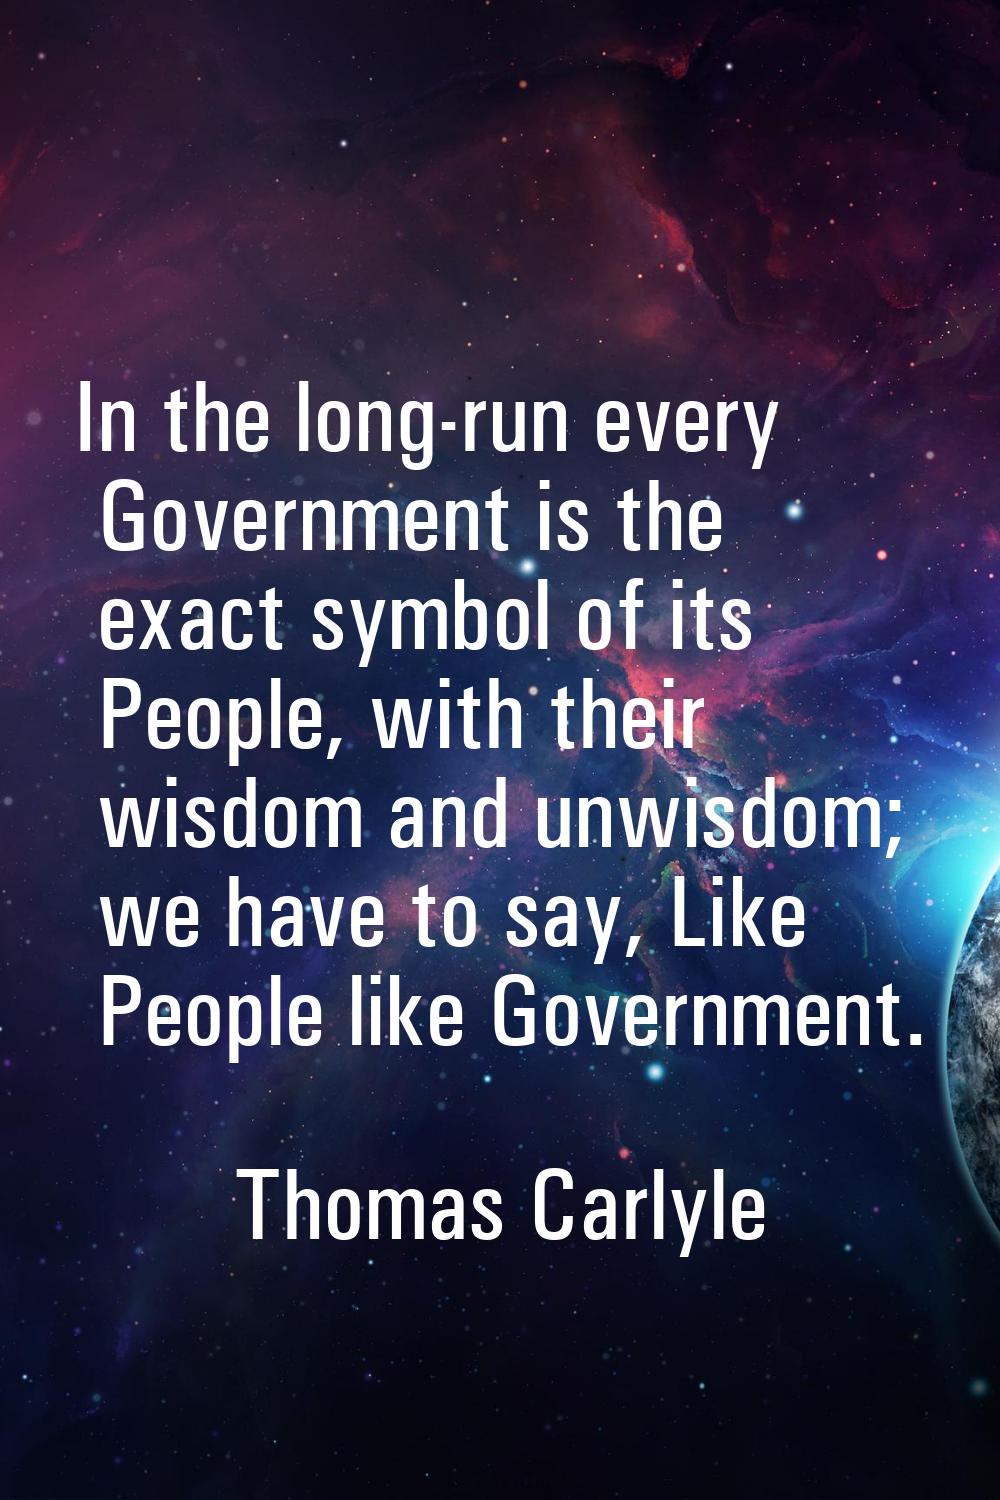 In the long-run every Government is the exact symbol of its People, with their wisdom and unwisdom;